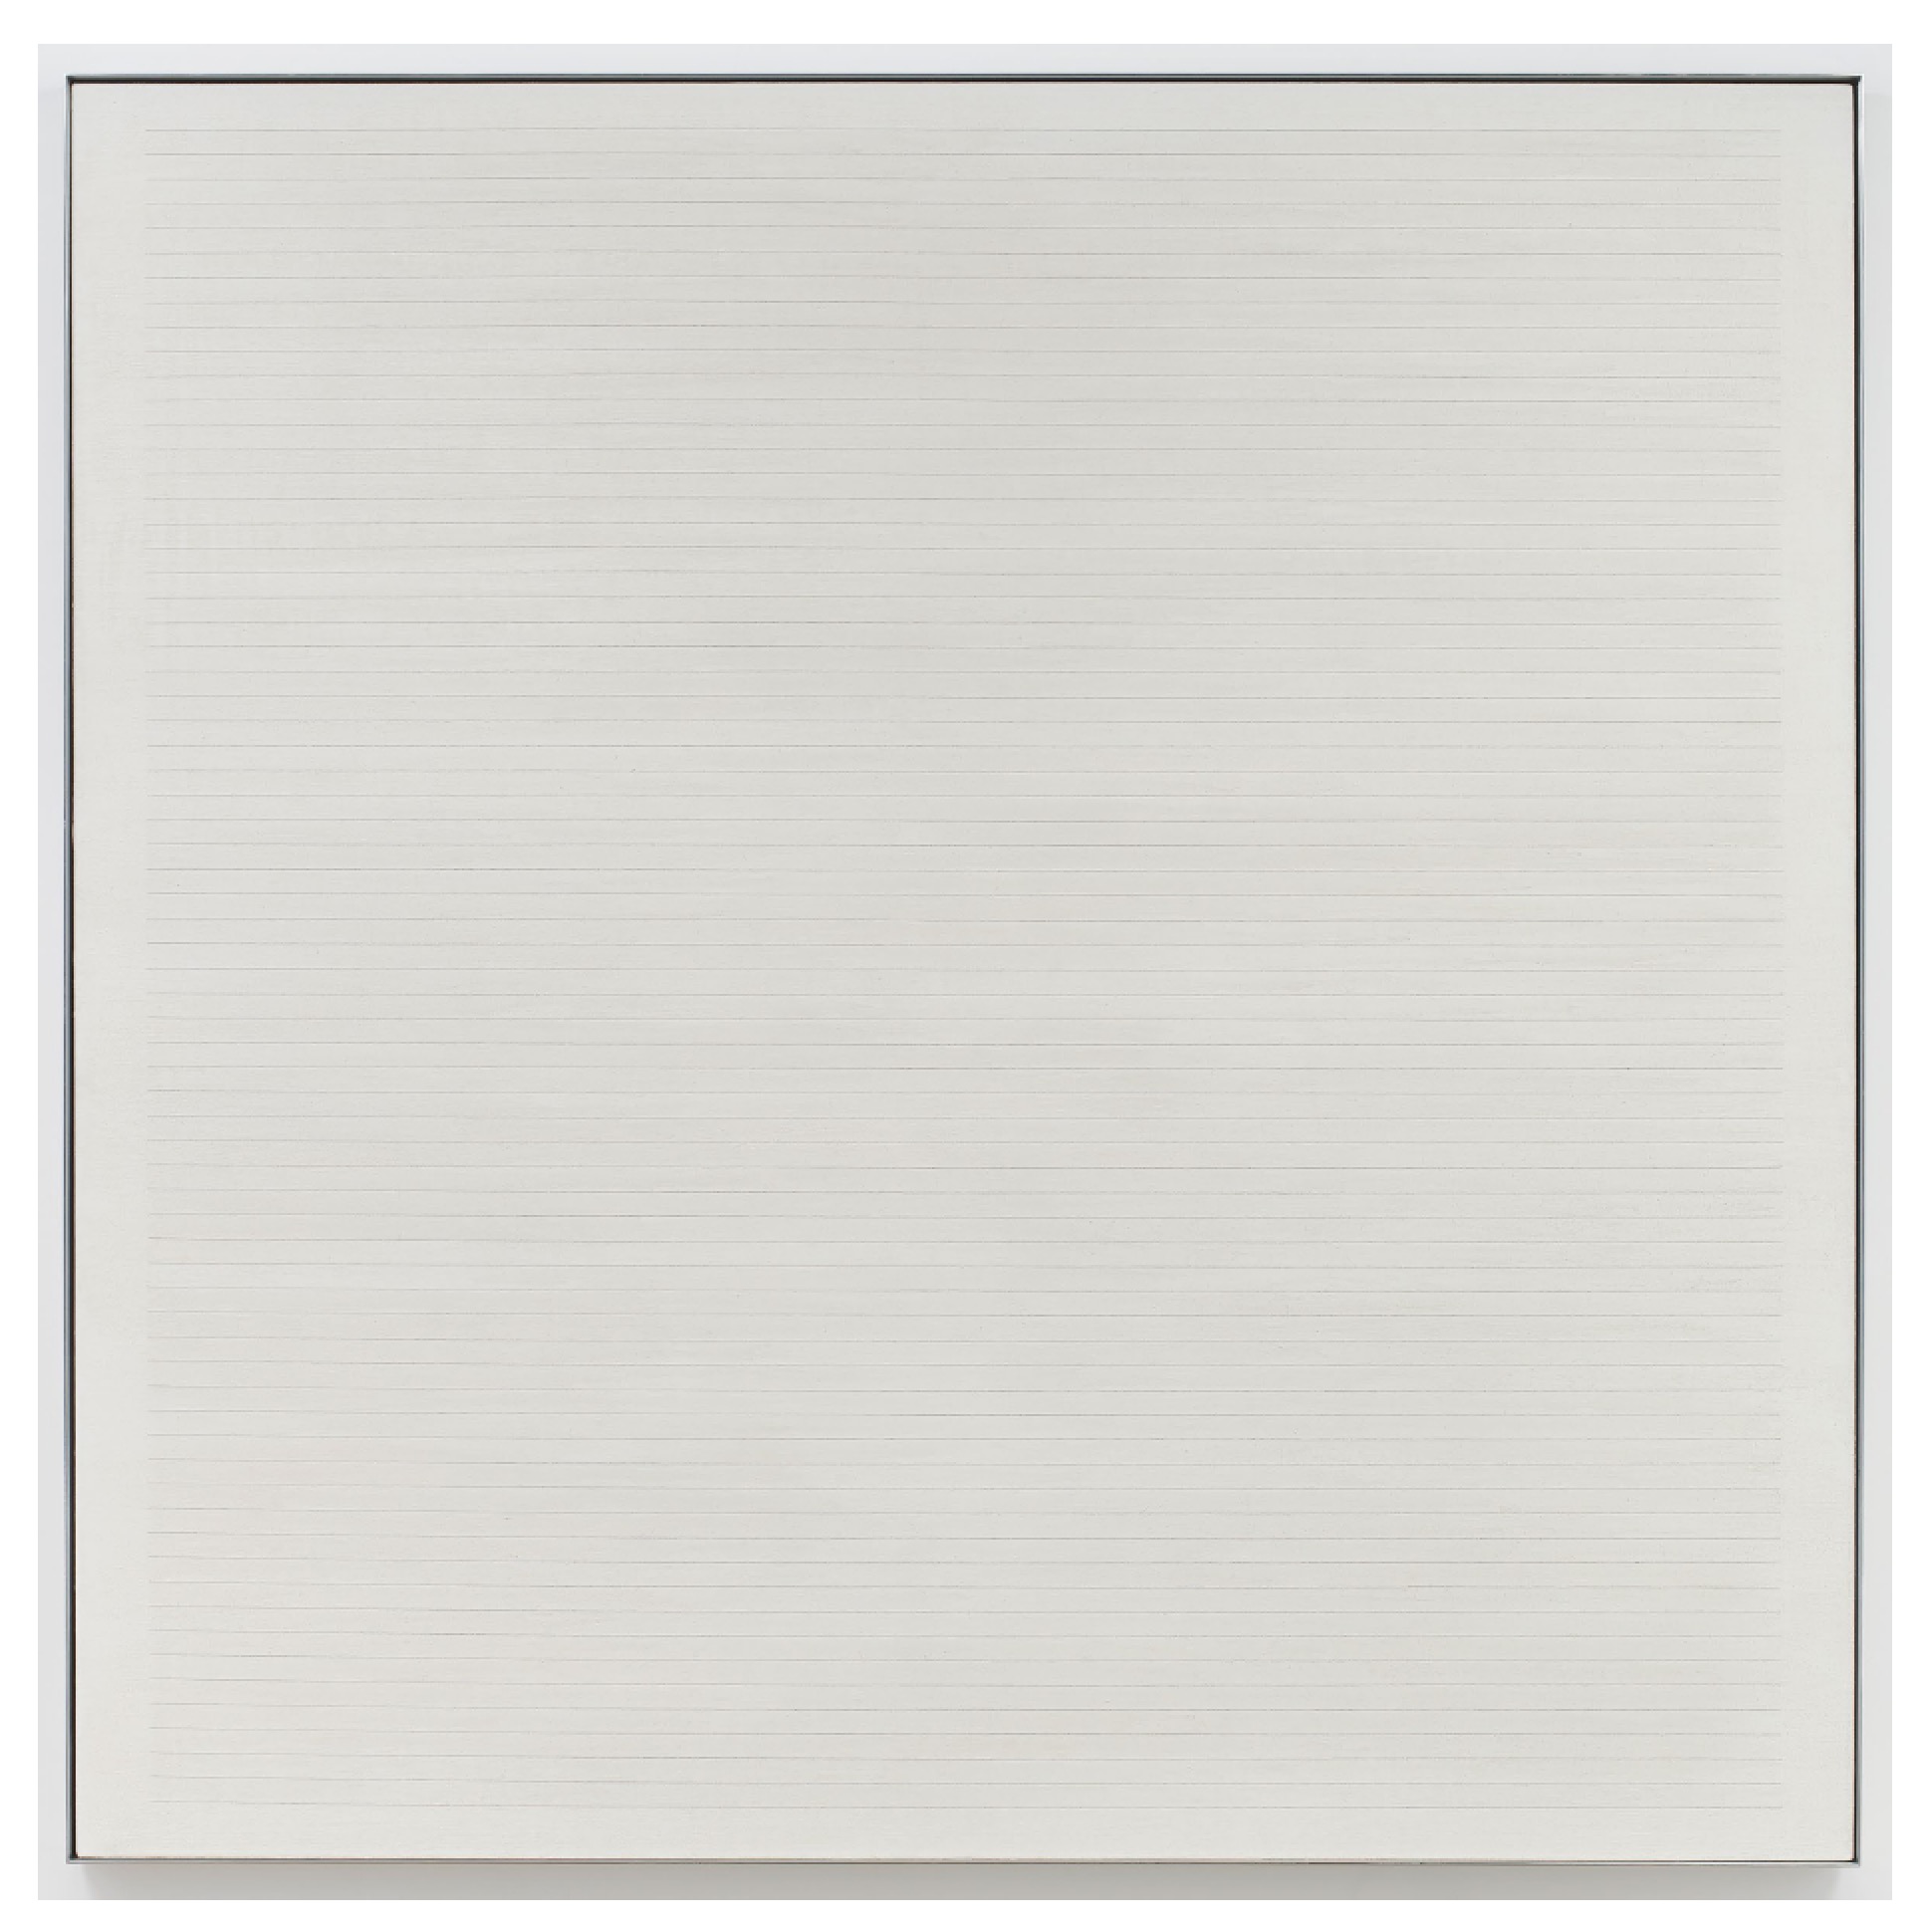 Agnes Martin Untitled #7, 1984 acrylic and graphite on canvas - image courtesy Pace Gallery